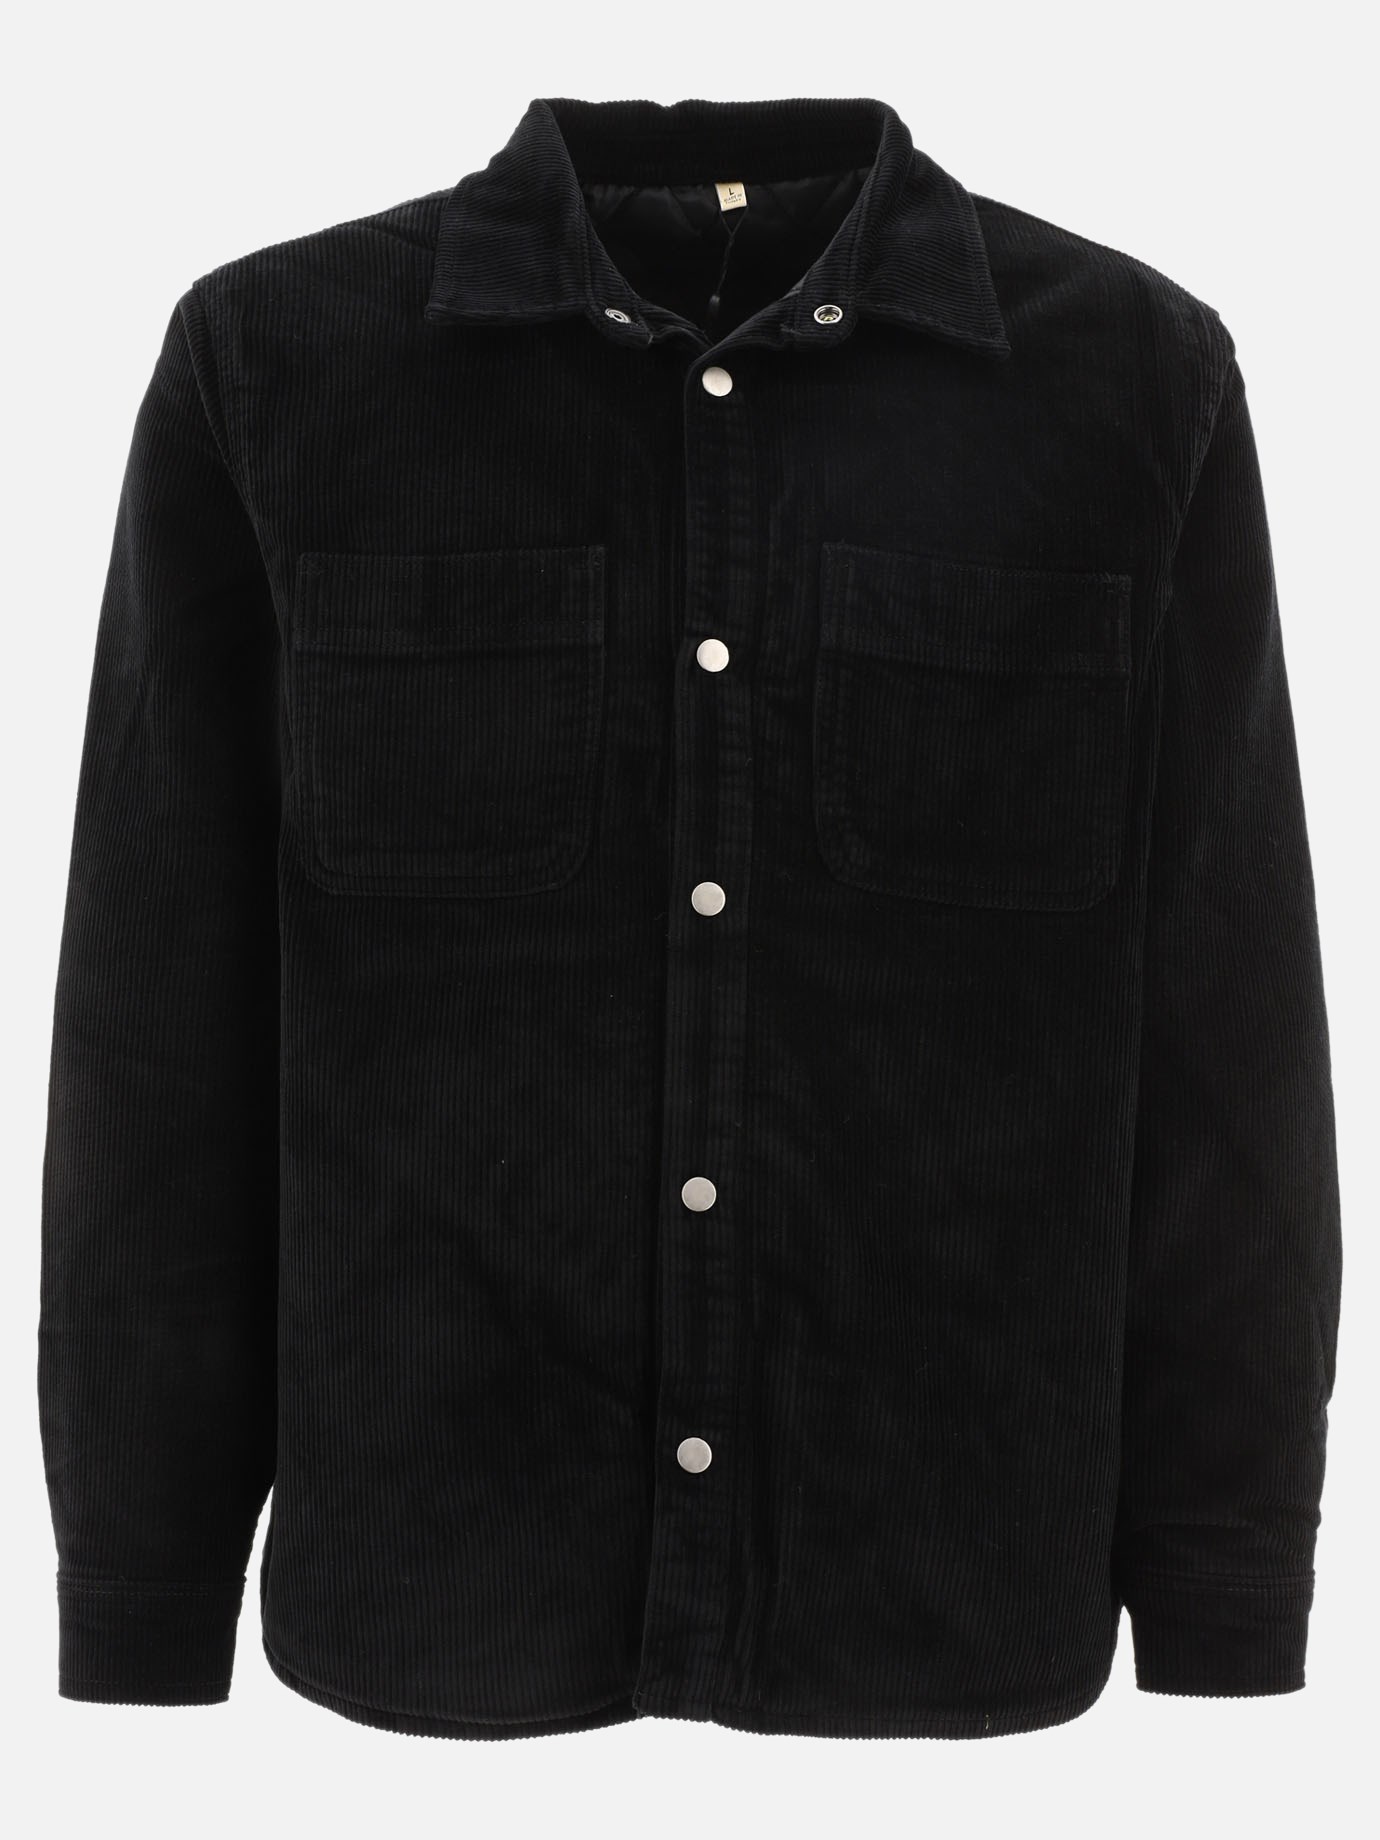 Overshirt  Cord Quilted by Stüssy - 4